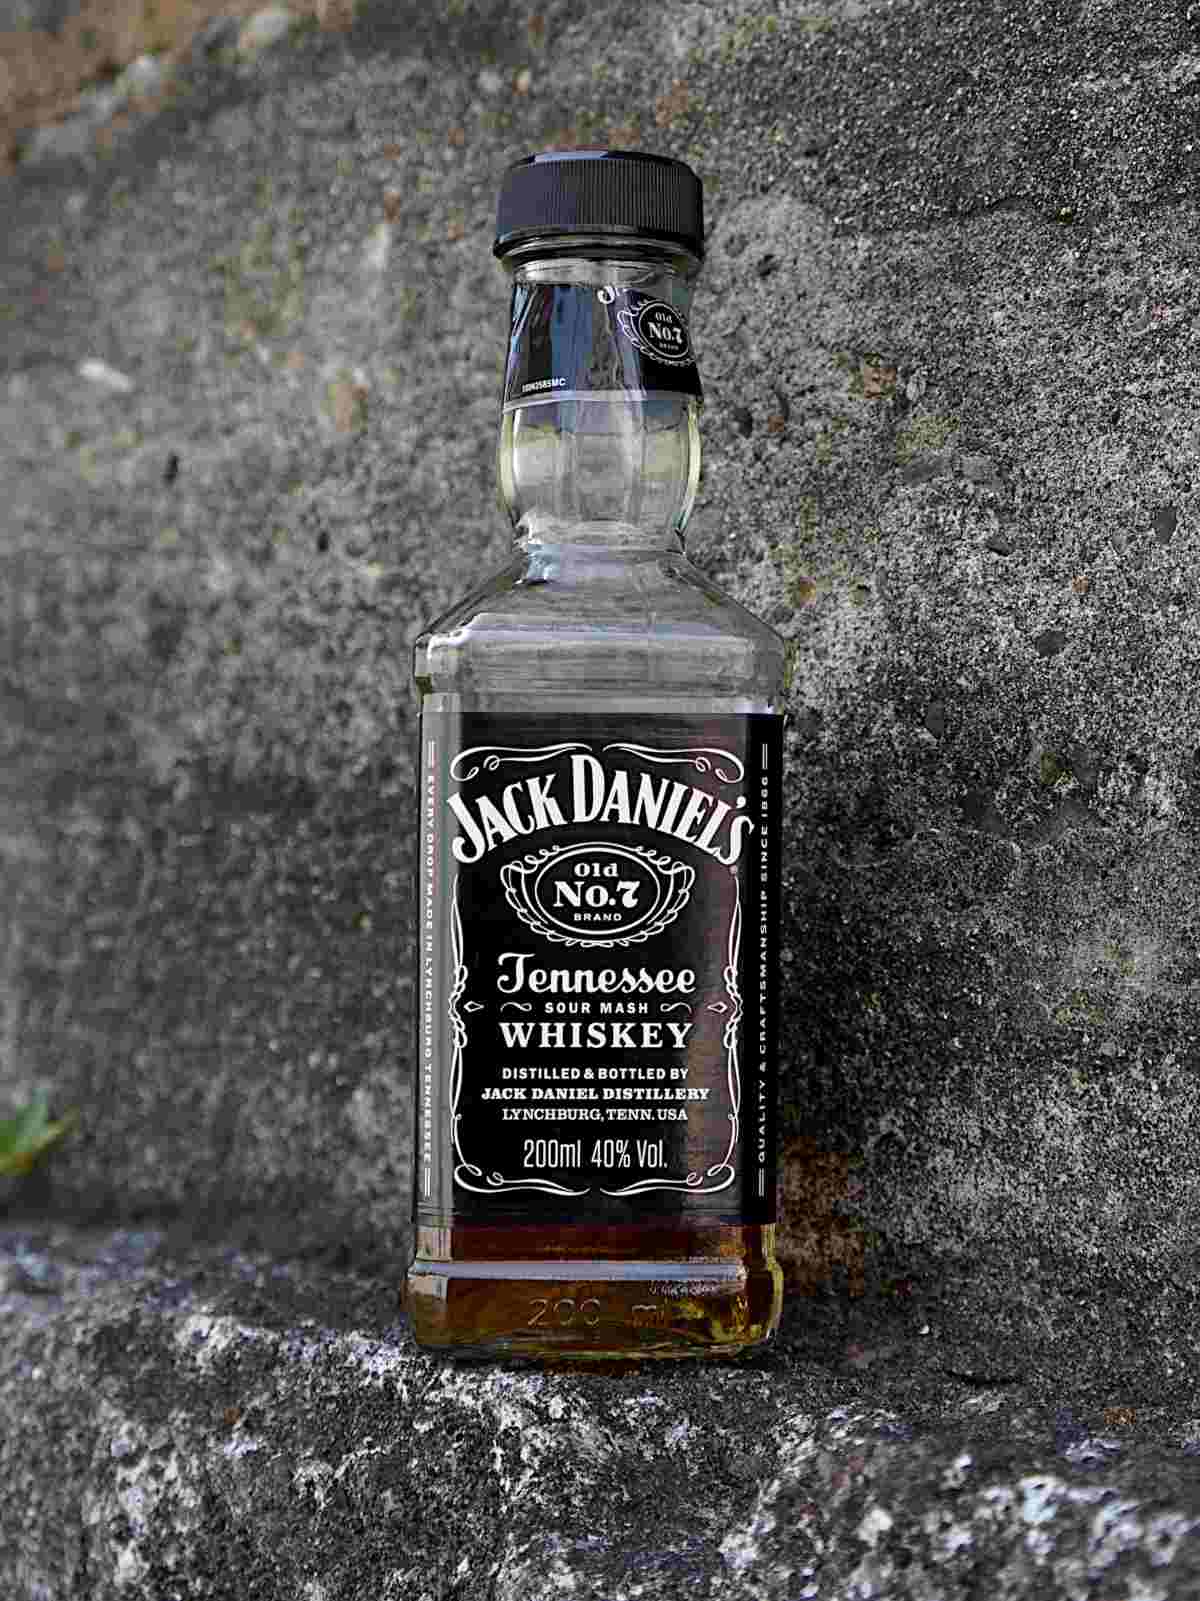 Jack Daniel's Old No. 7 Black Label Tennessee Whiskey Review